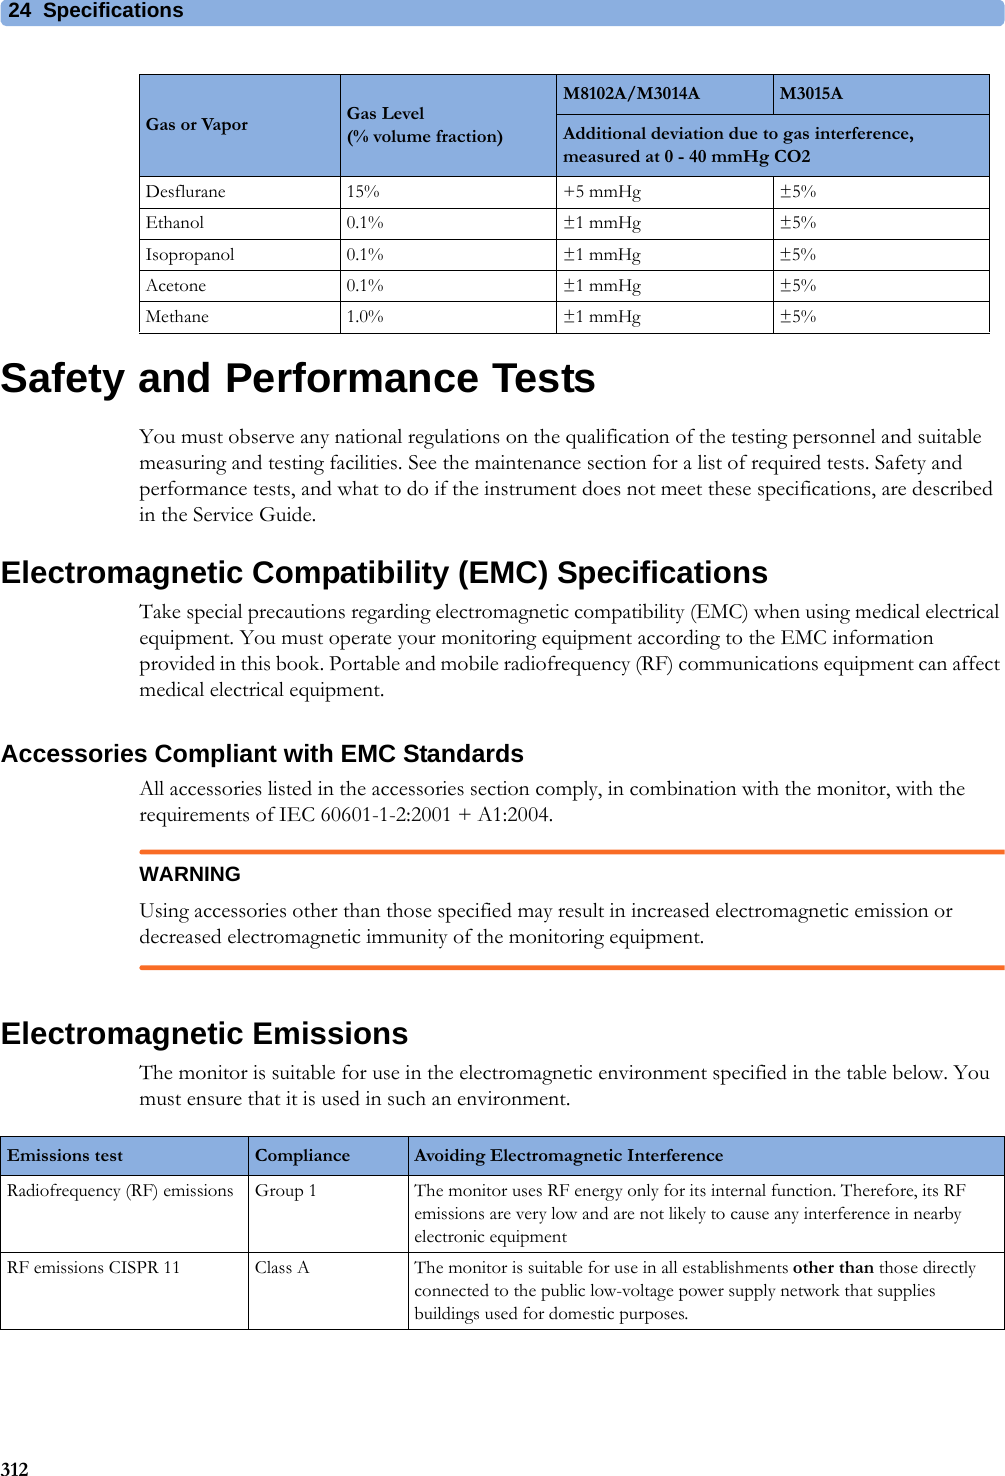 24 Specifications312Safety and Performance TestsYou must observe any national regulations on the qualification of the testing personnel and suitable measuring and testing facilities. See the maintenance section for a list of required tests. Safety and performance tests, and what to do if the instrument does not meet these specifications, are described in the Service Guide.Electromagnetic Compatibility (EMC) SpecificationsTake special precautions regarding electromagnetic compatibility (EMC) when using medical electrical equipment. You must operate your monitoring equipment according to the EMC information provided in this book. Portable and mobile radiofrequency (RF) communications equipment can affect medical electrical equipment.Accessories Compliant with EMC StandardsAll accessories listed in the accessories section comply, in combination with the monitor, with the requirements of IEC 60601-1-2:2001 + A1:2004.WARNINGUsing accessories other than those specified may result in increased electromagnetic emission or decreased electromagnetic immunity of the monitoring equipment.Electromagnetic EmissionsThe monitor is suitable for use in the electromagnetic environment specified in the table below. You must ensure that it is used in such an environment.Desflurane 15% +5 mmHg ±5%Ethanol 0.1% ±1 mmHg ±5%Isopropanol 0.1% ±1 mmHg ±5%Acetone 0.1% ±1 mmHg ±5%Methane 1.0% ±1 mmHg ±5%Gas or Vapor Gas Level (% volume fraction)M8102A/M3014A M3015AAdditional deviation due to gas interference, measured at 0 - 40 mmHg CO2Emissions test Compliance Avoiding Electromagnetic InterferenceRadiofrequency (RF) emissions Group 1 The monitor uses RF energy only for its internal function. Therefore, its RF emissions are very low and are not likely to cause any interference in nearby electronic equipmentRF emissions CISPR 11 Class A The monitor is suitable for use in all establishments other than those directly connected to the public low-voltage power supply network that supplies buildings used for domestic purposes.